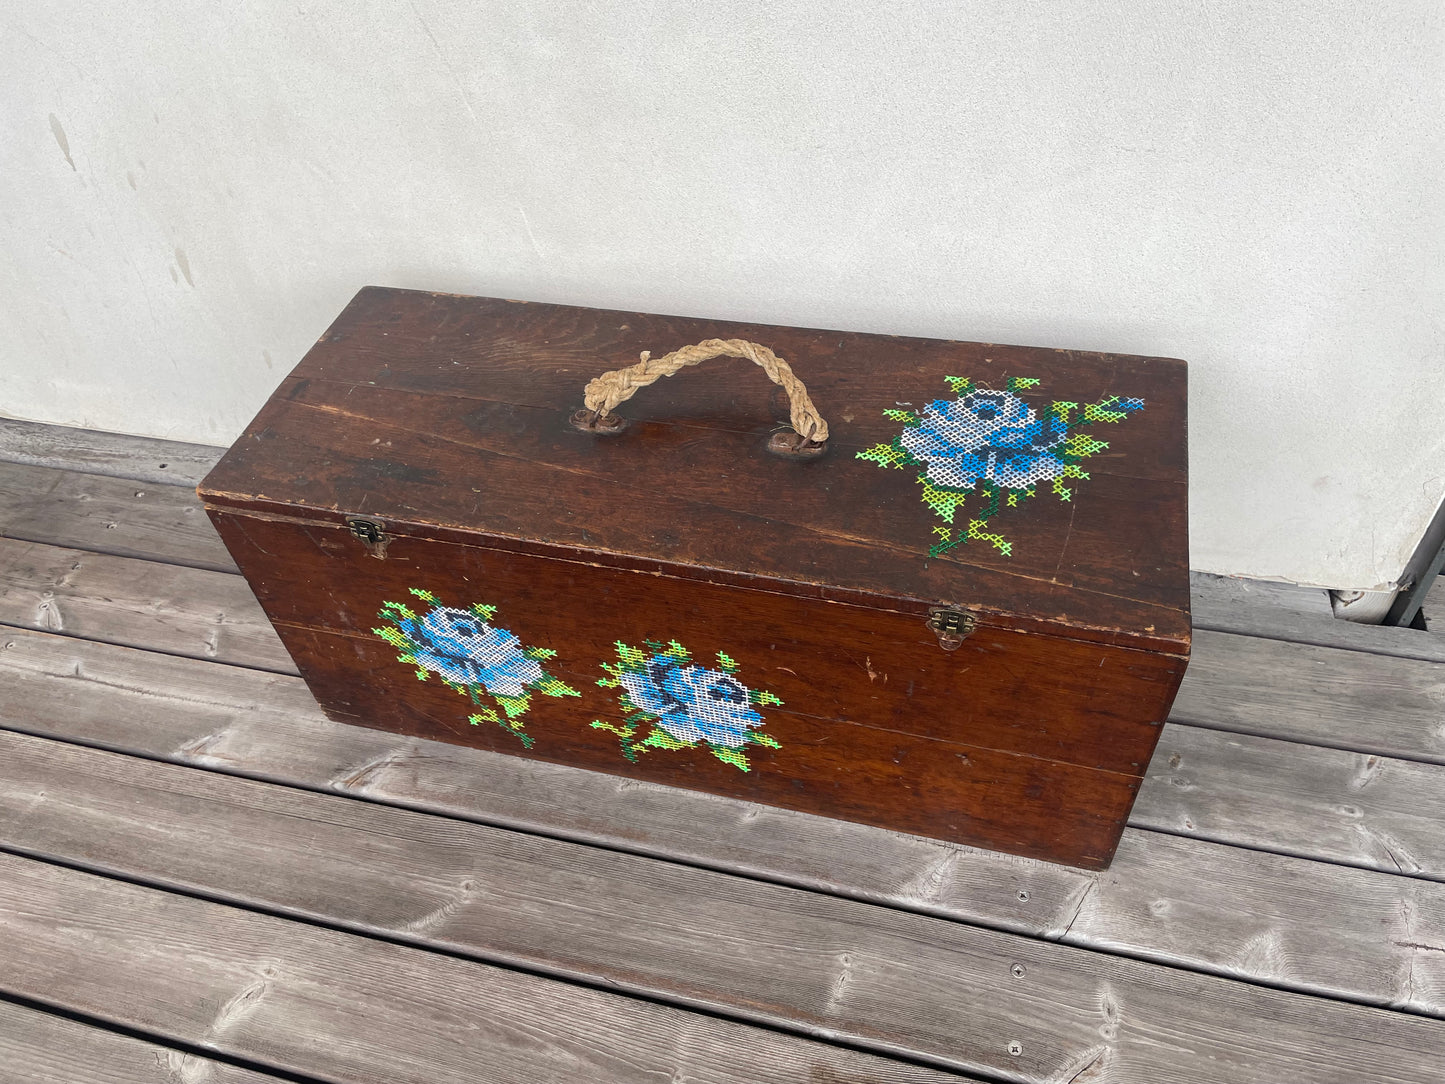 Embroidered Wooden Box